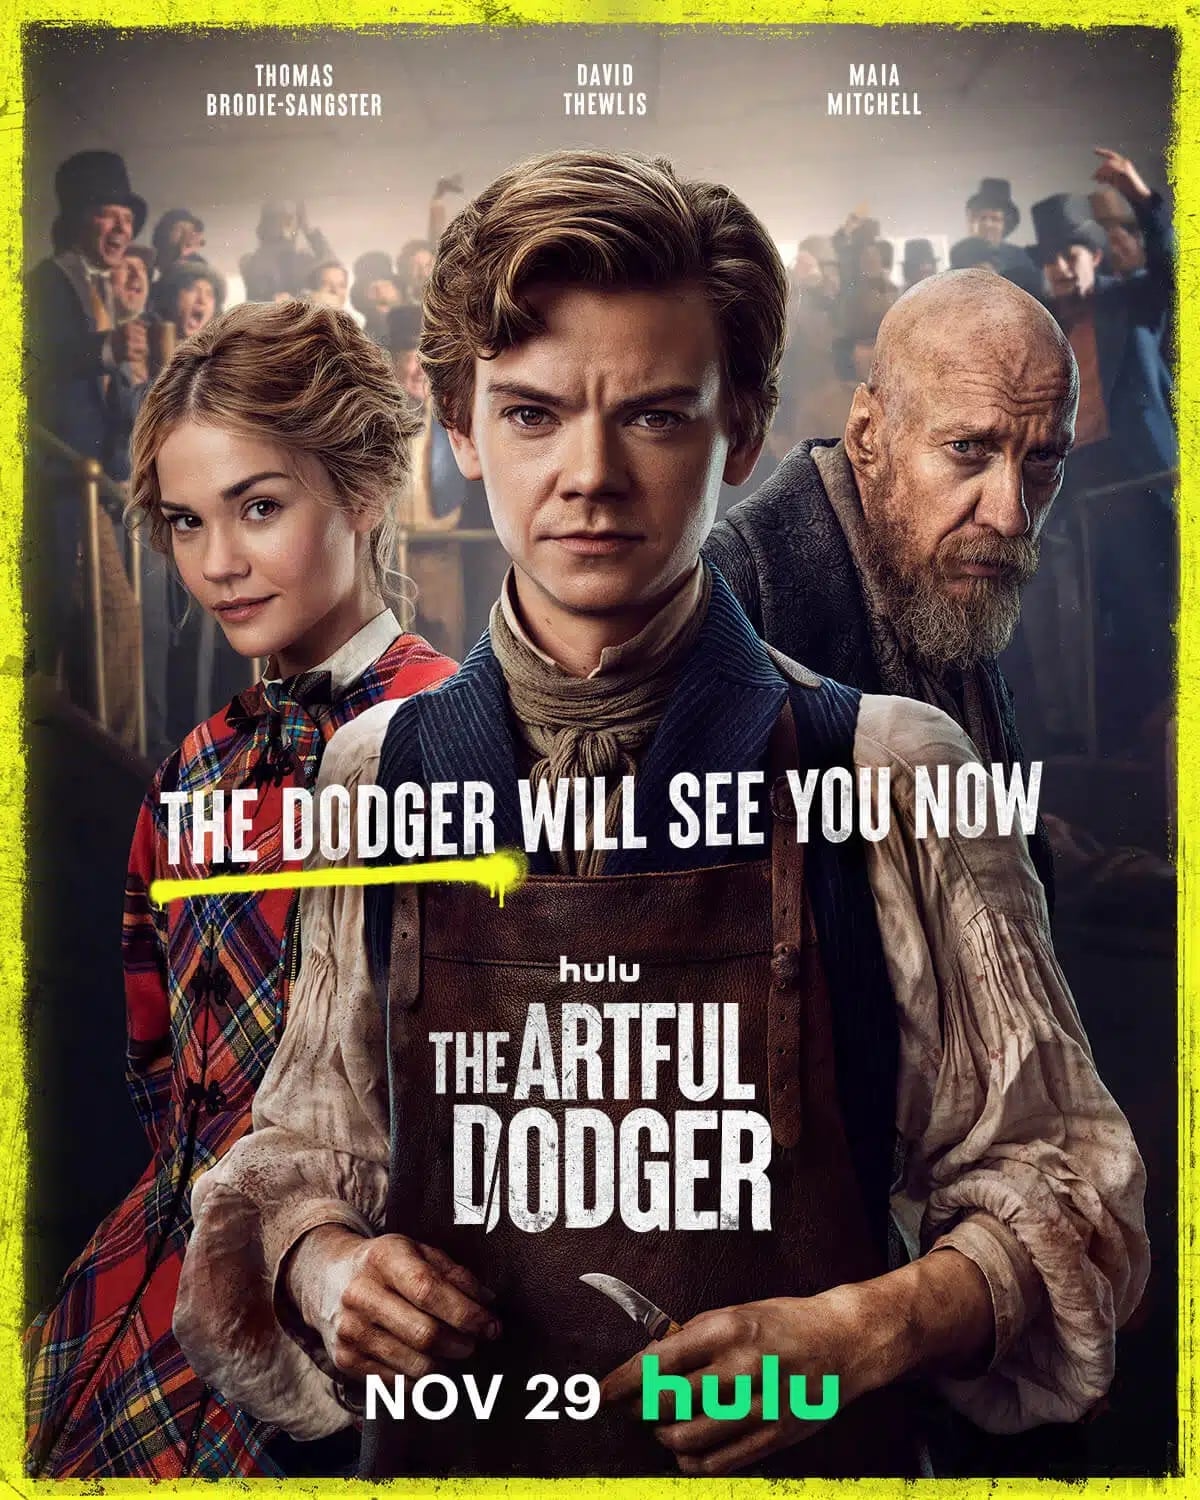 The Artful Dodger. Set in 1850s Australia the series follows adult double life of Charles Dickens' famous prince of thieves Dodger now a surgeon, but who can't shake his predilection for